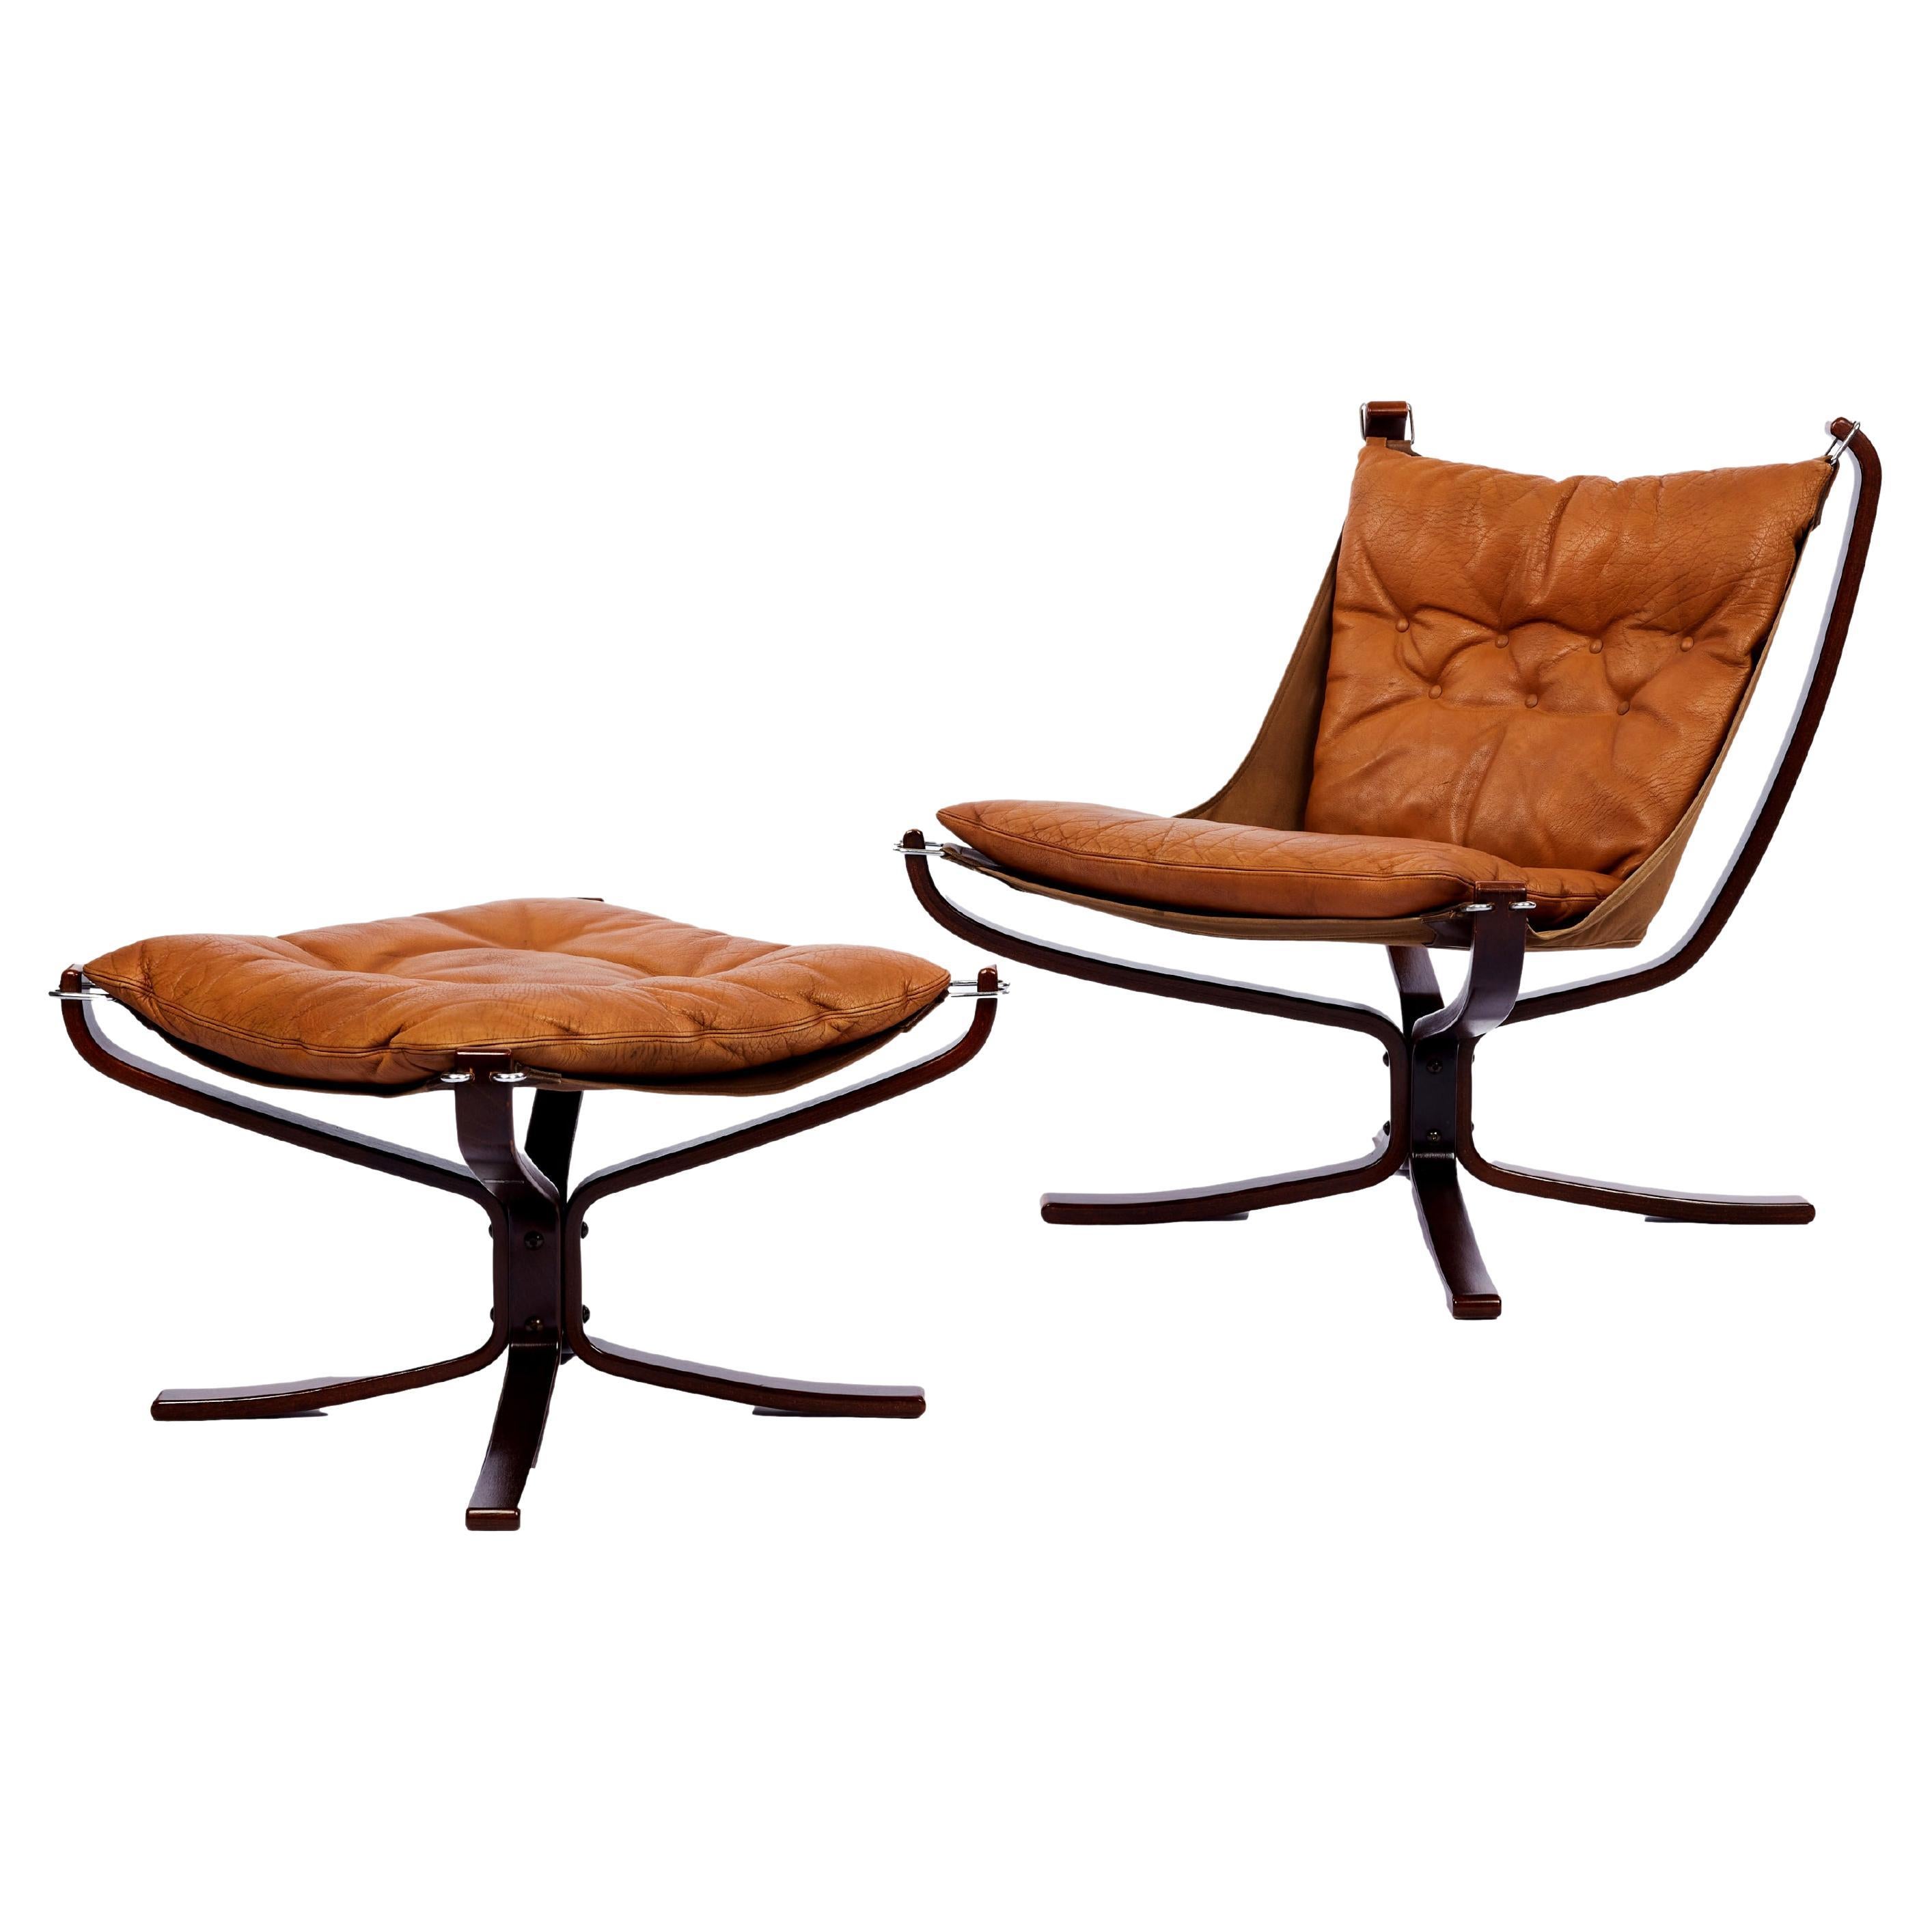 SIGURD RESSELL "FALCON" CHAIR and OTTOMAN